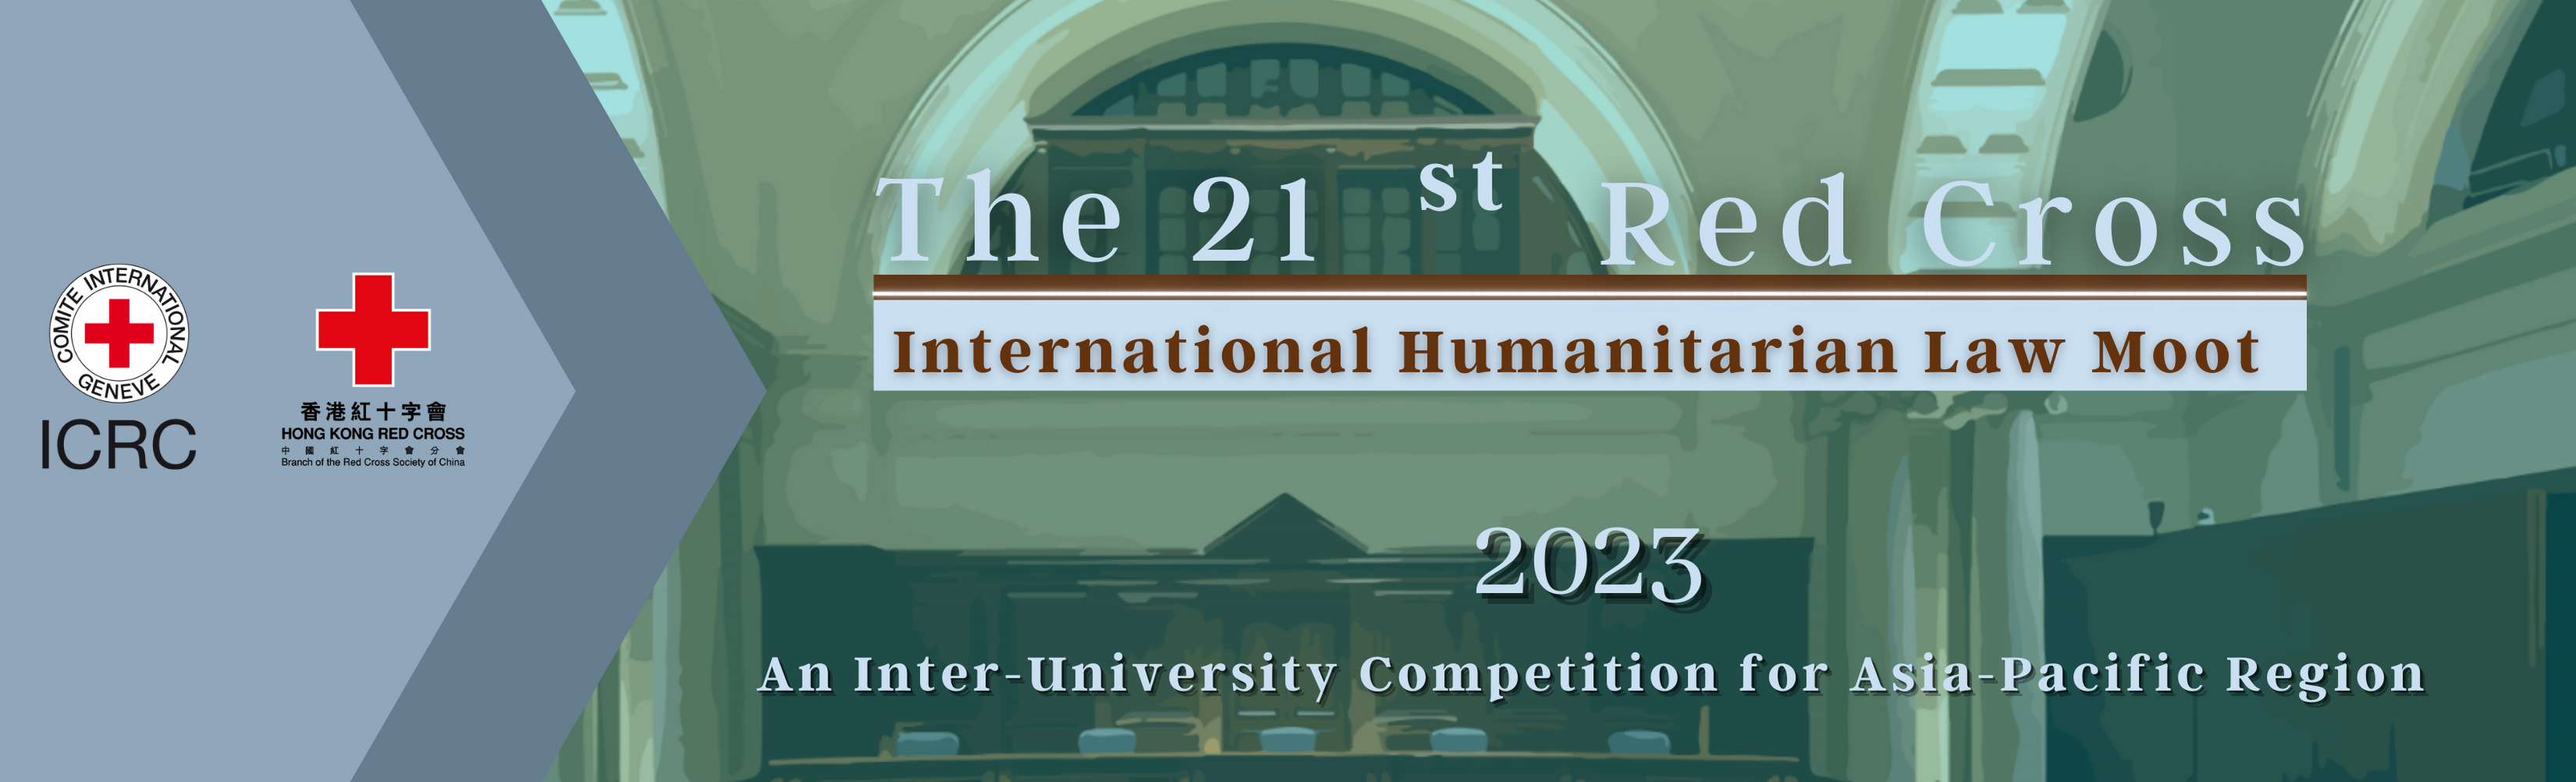 National Taiwan University Is Representing Taiwan to Compete in the 21th IHL Moot for Asia-Pacific Region 2023